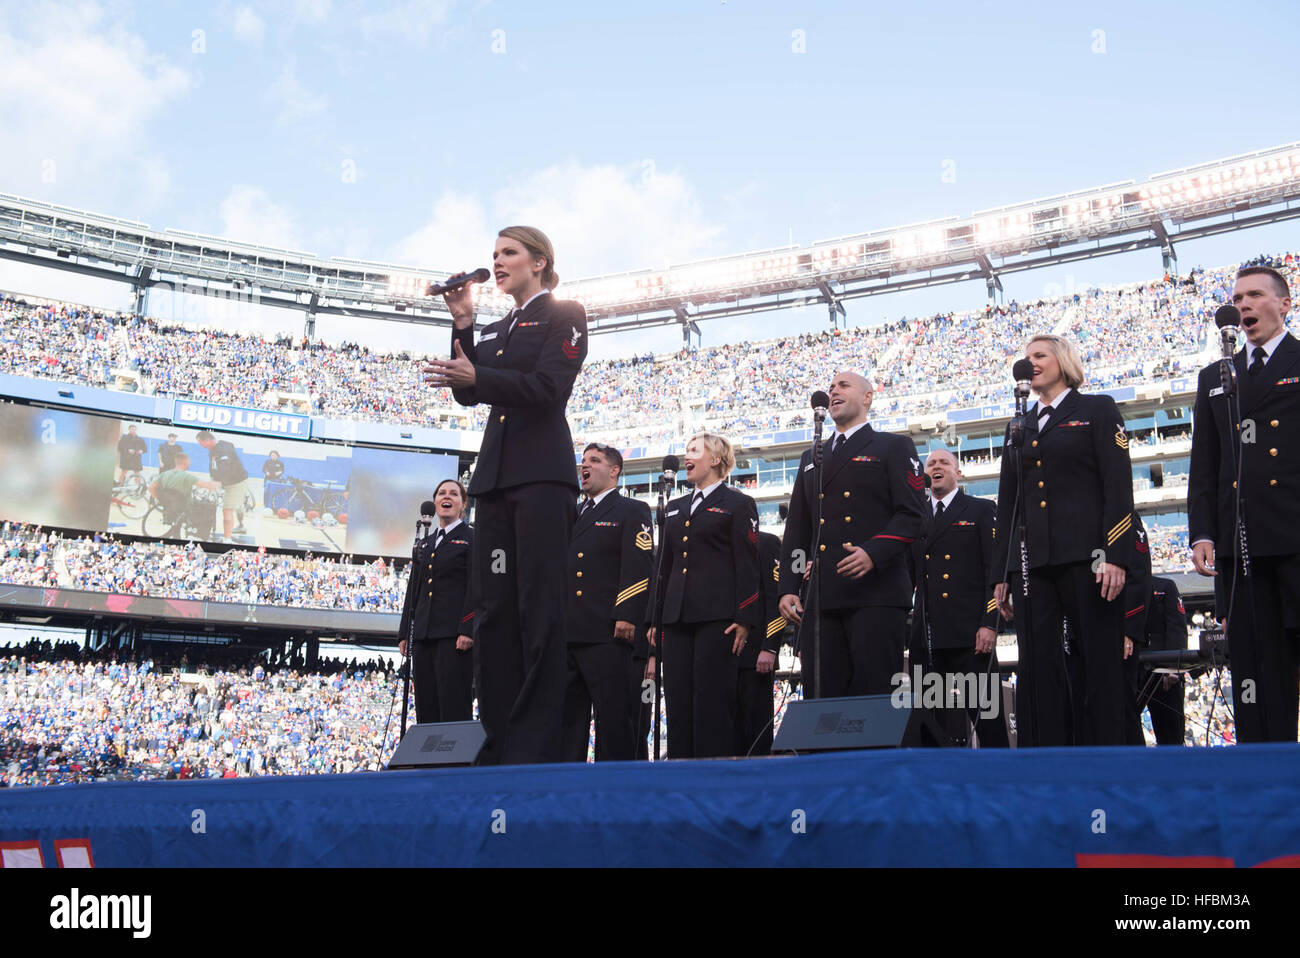 161106-N-HG258-069 East Rutherford, N.J. (November 6, 2016) Alto vocalist Petty Officer 1st Class Chelsi Ervien sings 'Fight Song' during a halftime show by the U.S. Navy Band at a National Football game between the New York Giants and Philadelphia Eagles. Members of the U.S. Navy Band Sea Chanters chorus and Cruisers contemporary music ensemble performed on the field at MetLife Staduim during a halftime show supporting the NFL's 'Salute to Service' game between the New York Giants and the Philadelphia Eagles. (U.S. Navy phot by SCPO Stephen Hassay/released) 161106-N-HG258-069 161106-N-HG258-0 Stock Photo